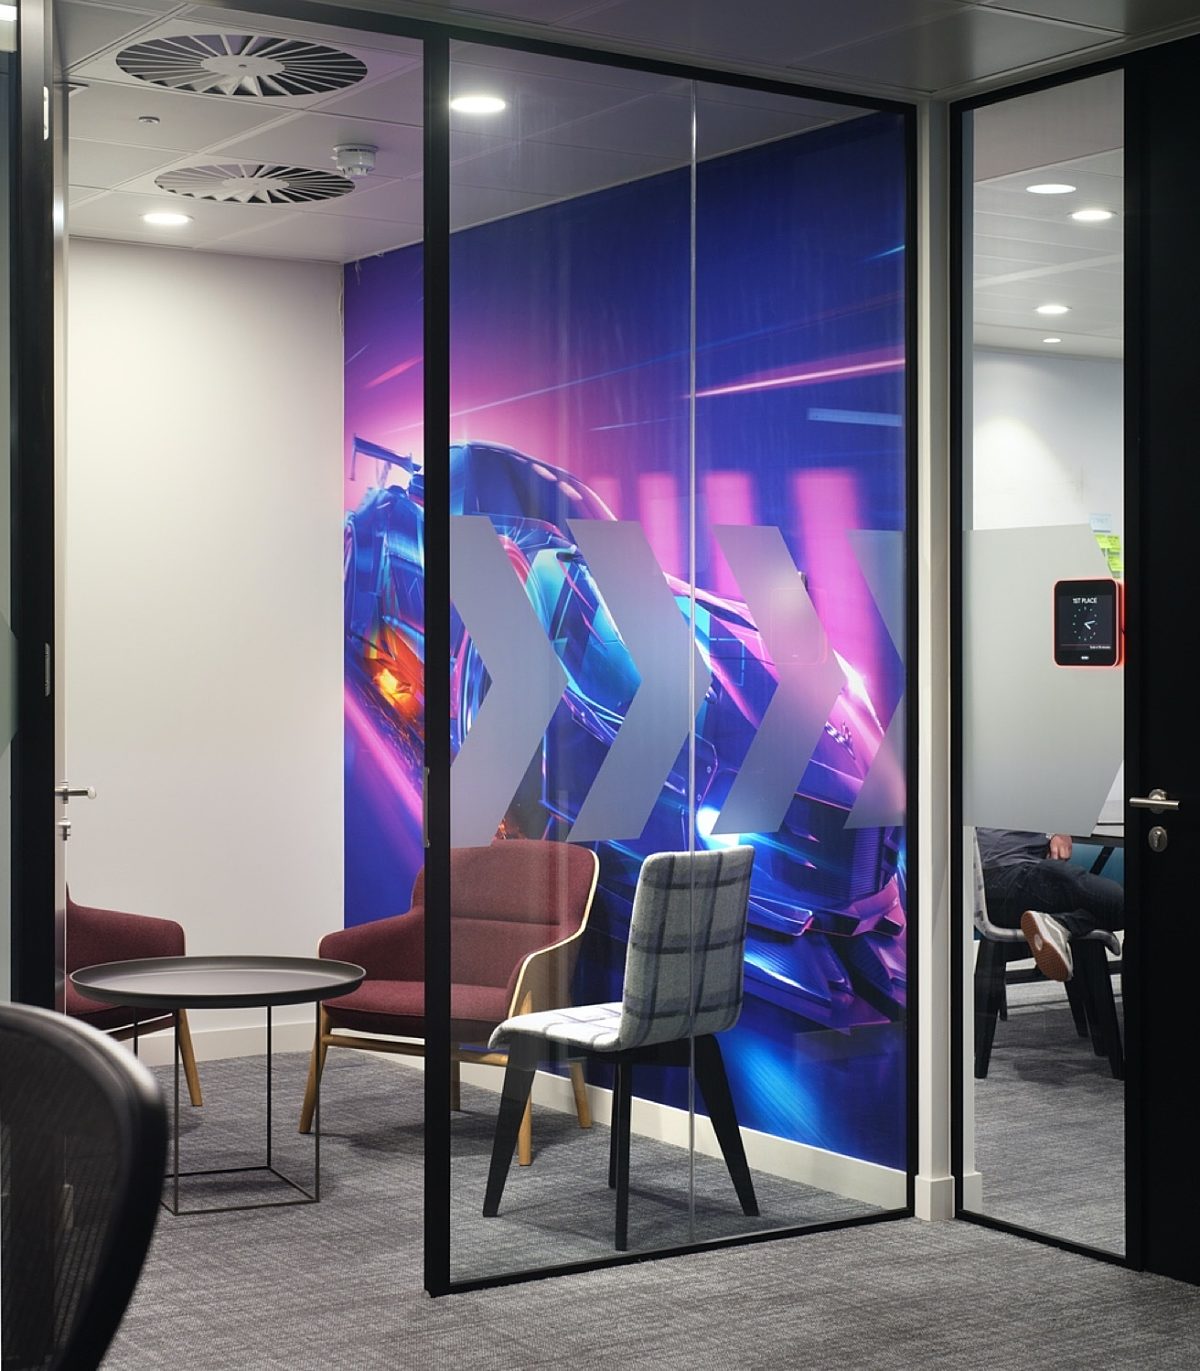 Cool designed office with car image